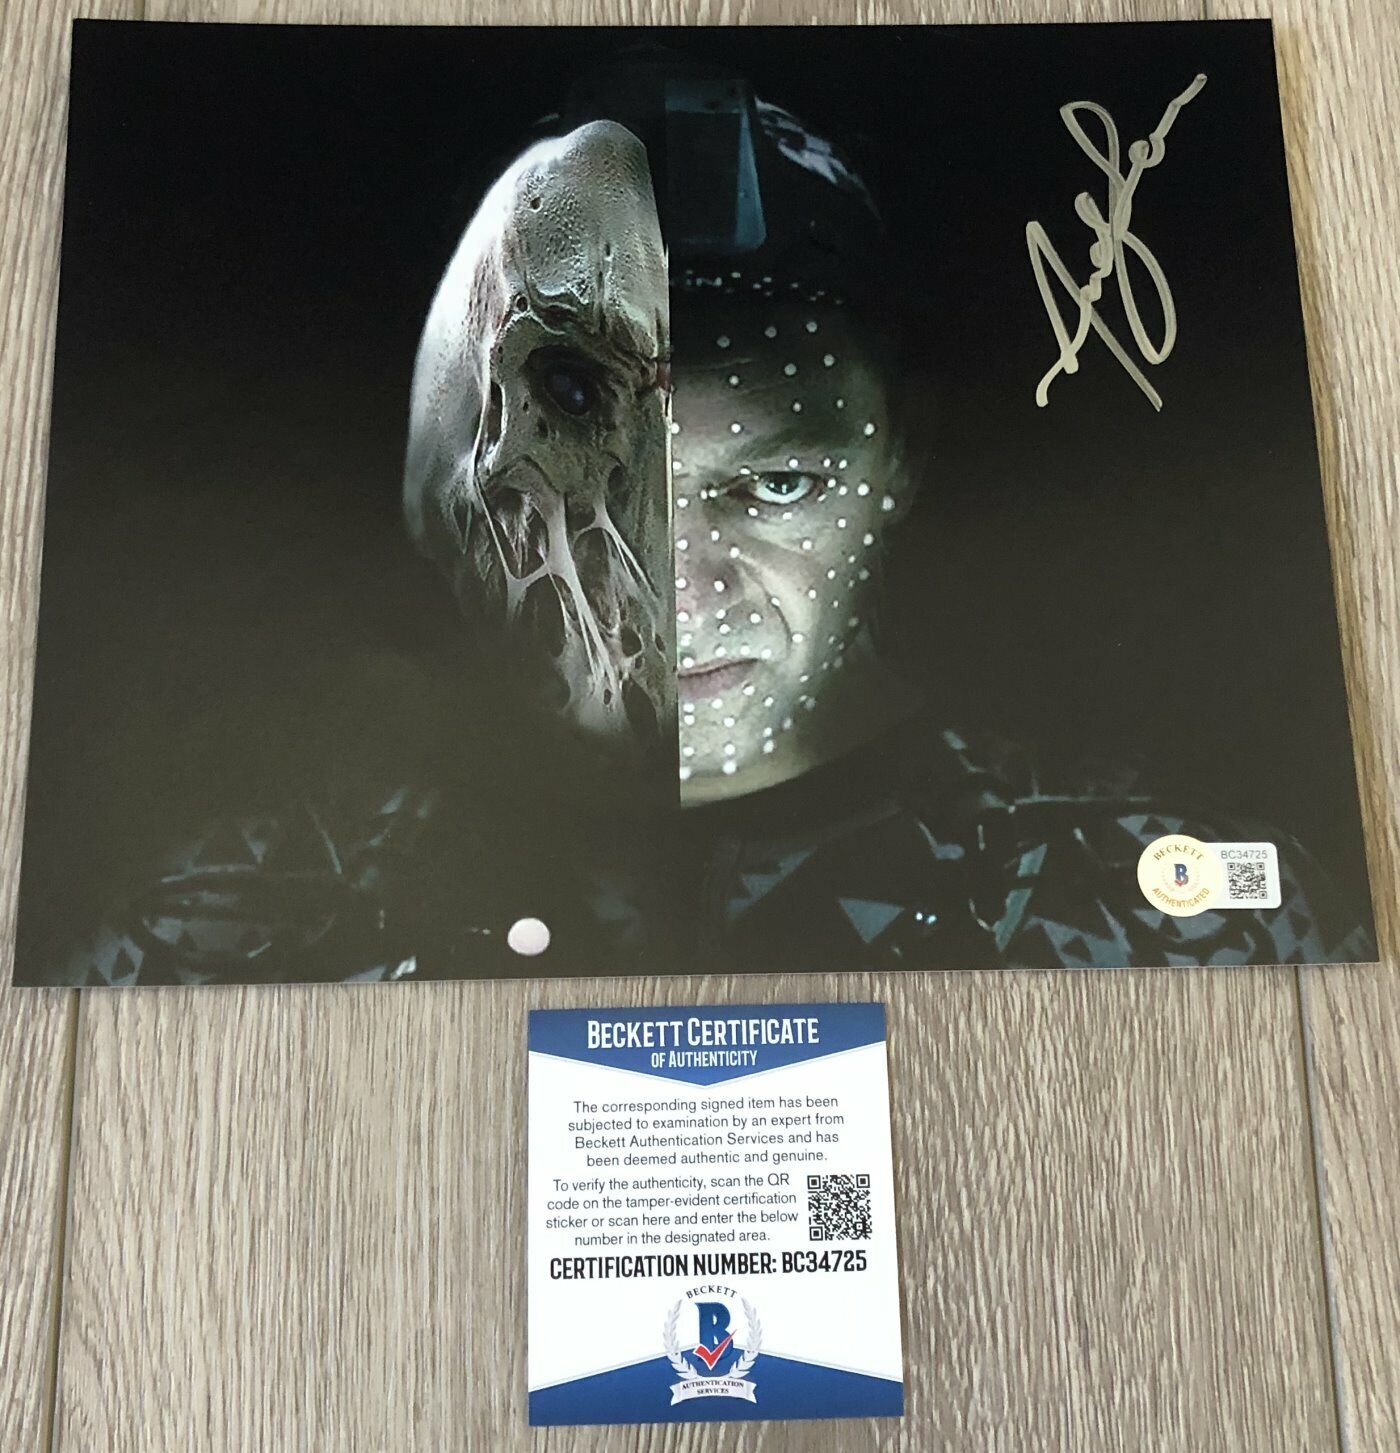 ANDY SERKIS SIGNED STAR WARS THE FORCE AWAKENS 8x10 Photo Poster painting wPROOF BAS BECKETT COA